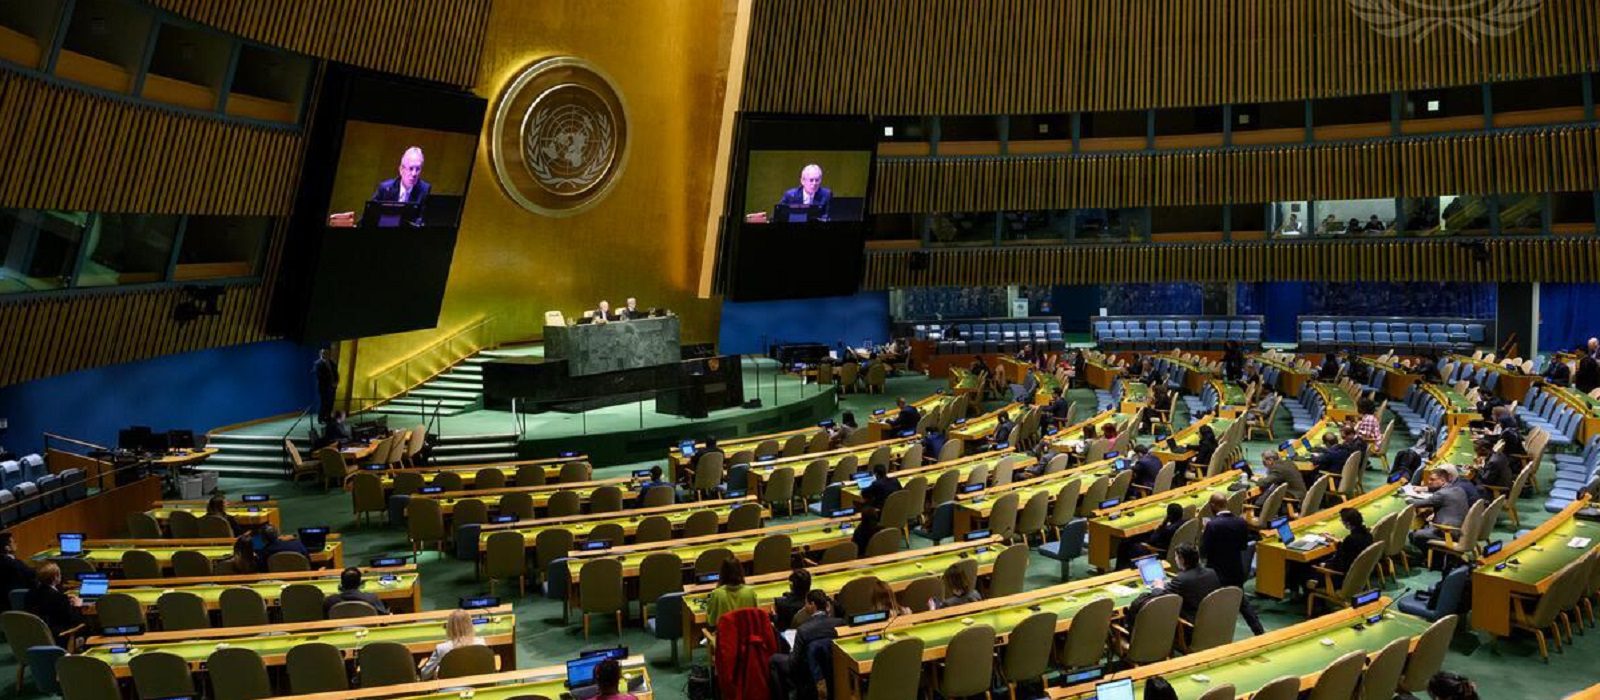 Csaba Kőrösi (left at dais and on screens), President of the seventy-seventh session of the United Nations General Assembly, chairs the 66th plenary meeting of the General Assembly.